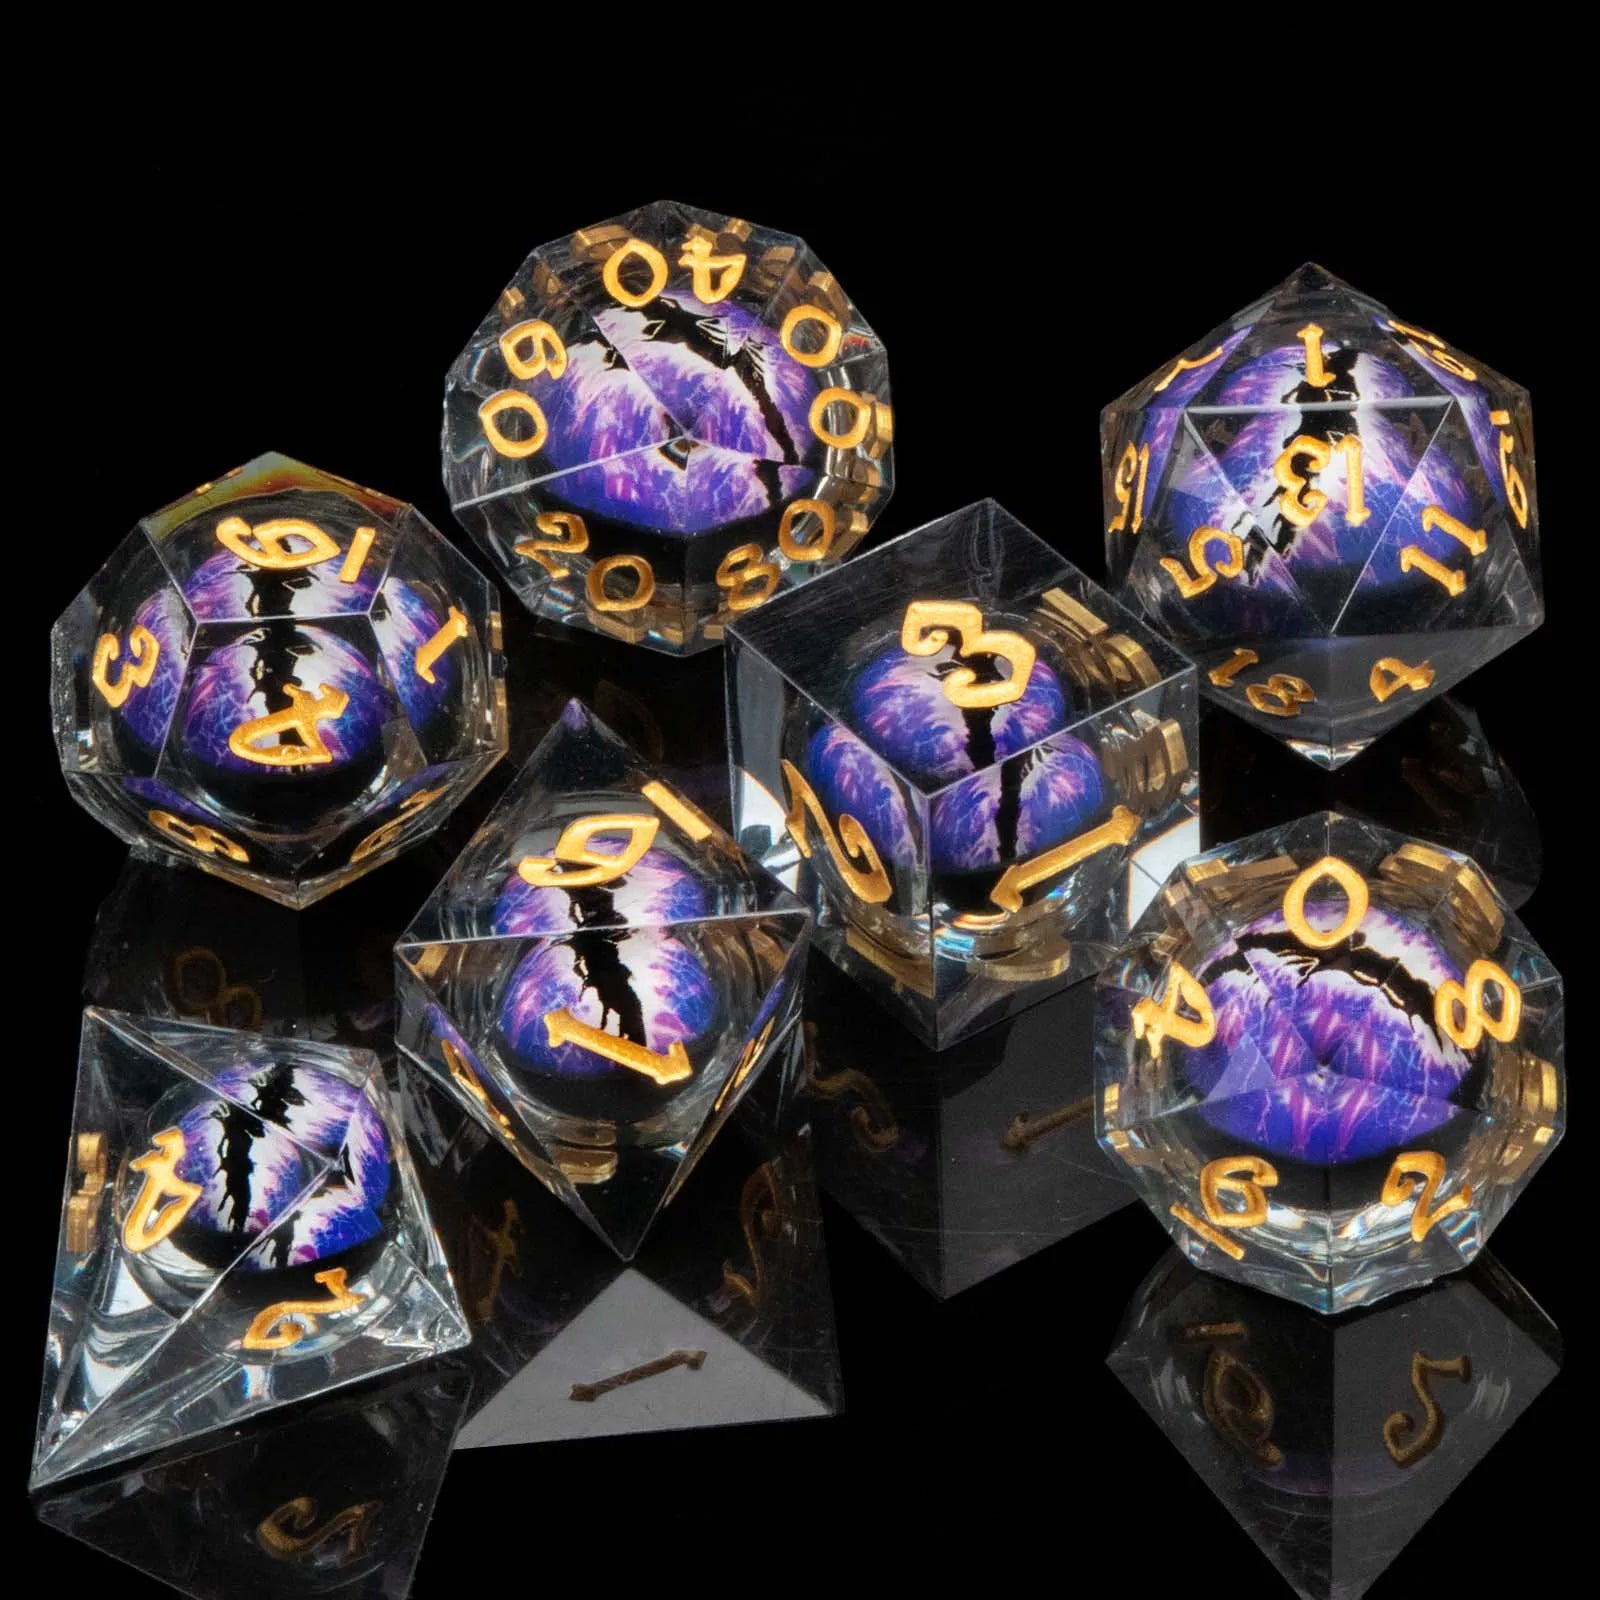 DND Eye Liquid Flow Core Resin D&D Dice Set For D and D Dungeon and Dragon Pathfinder Table Role Playing Game Polyhedral Dice AZ05